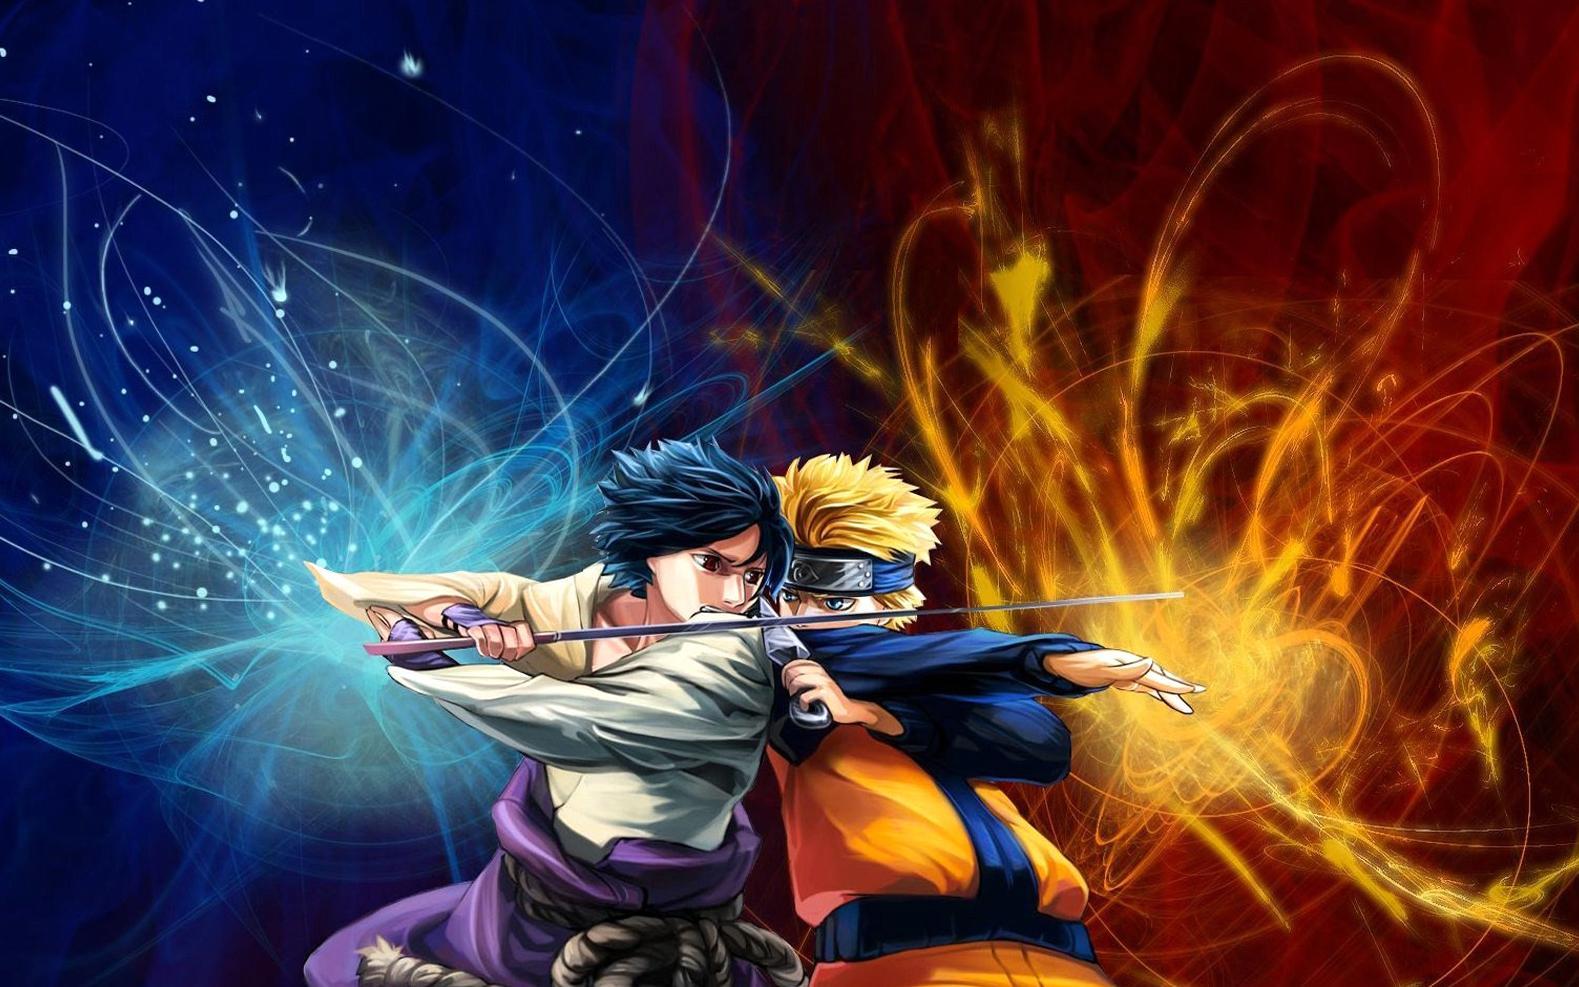 Download Naruto wallpapers for mobile phone free Naruto HD pictures